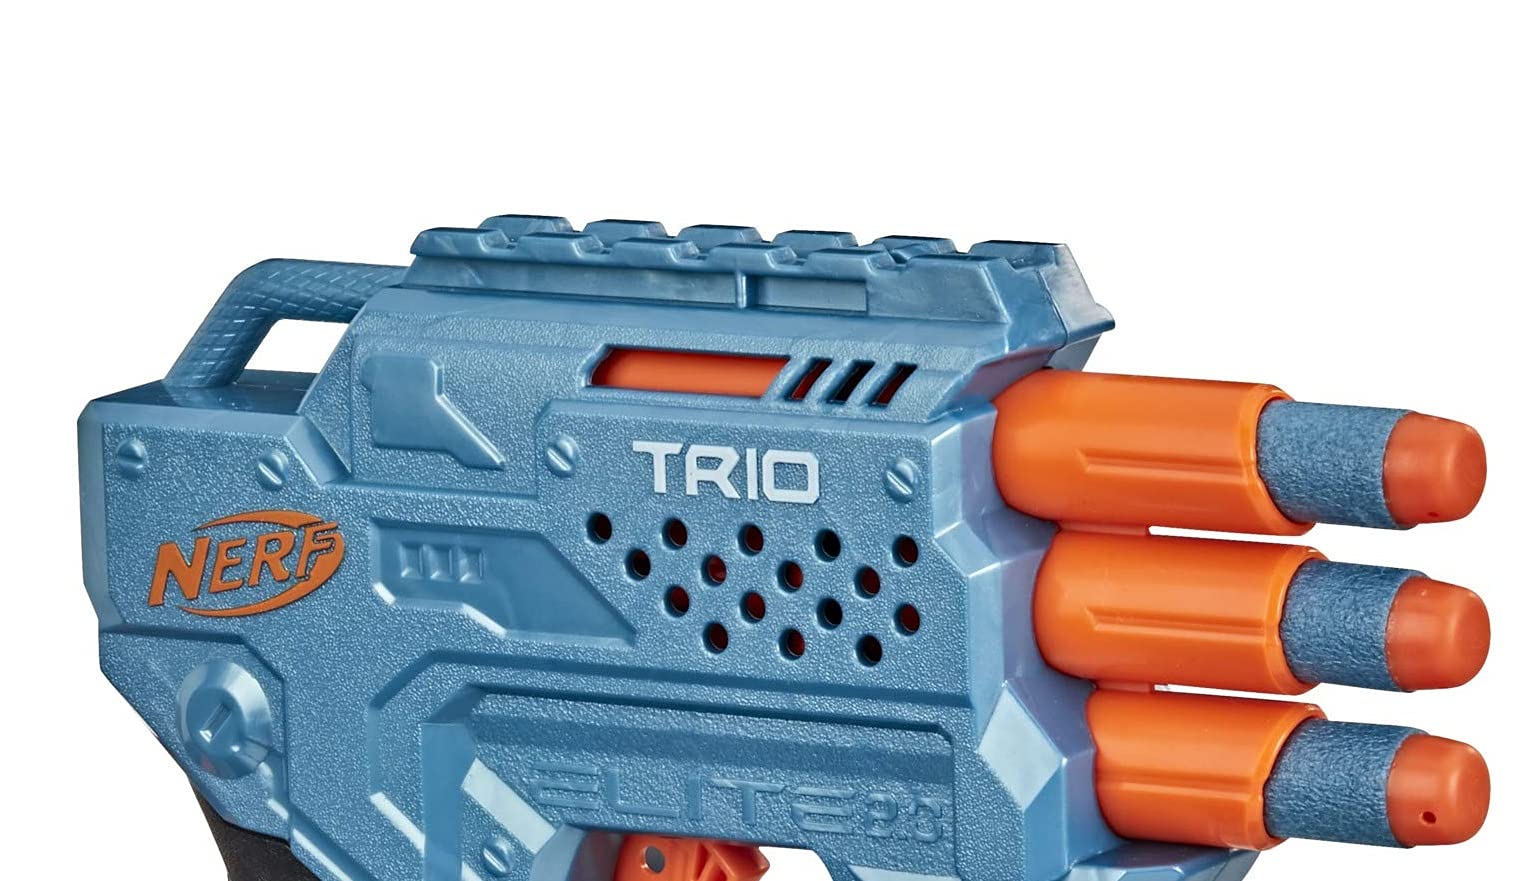 NERF Elite 2.0 Trio SD-3 Blaster -- Includes 6 Official Darts -- 3-Barrel Blasting -- Tactical Rail for Customizing Capability